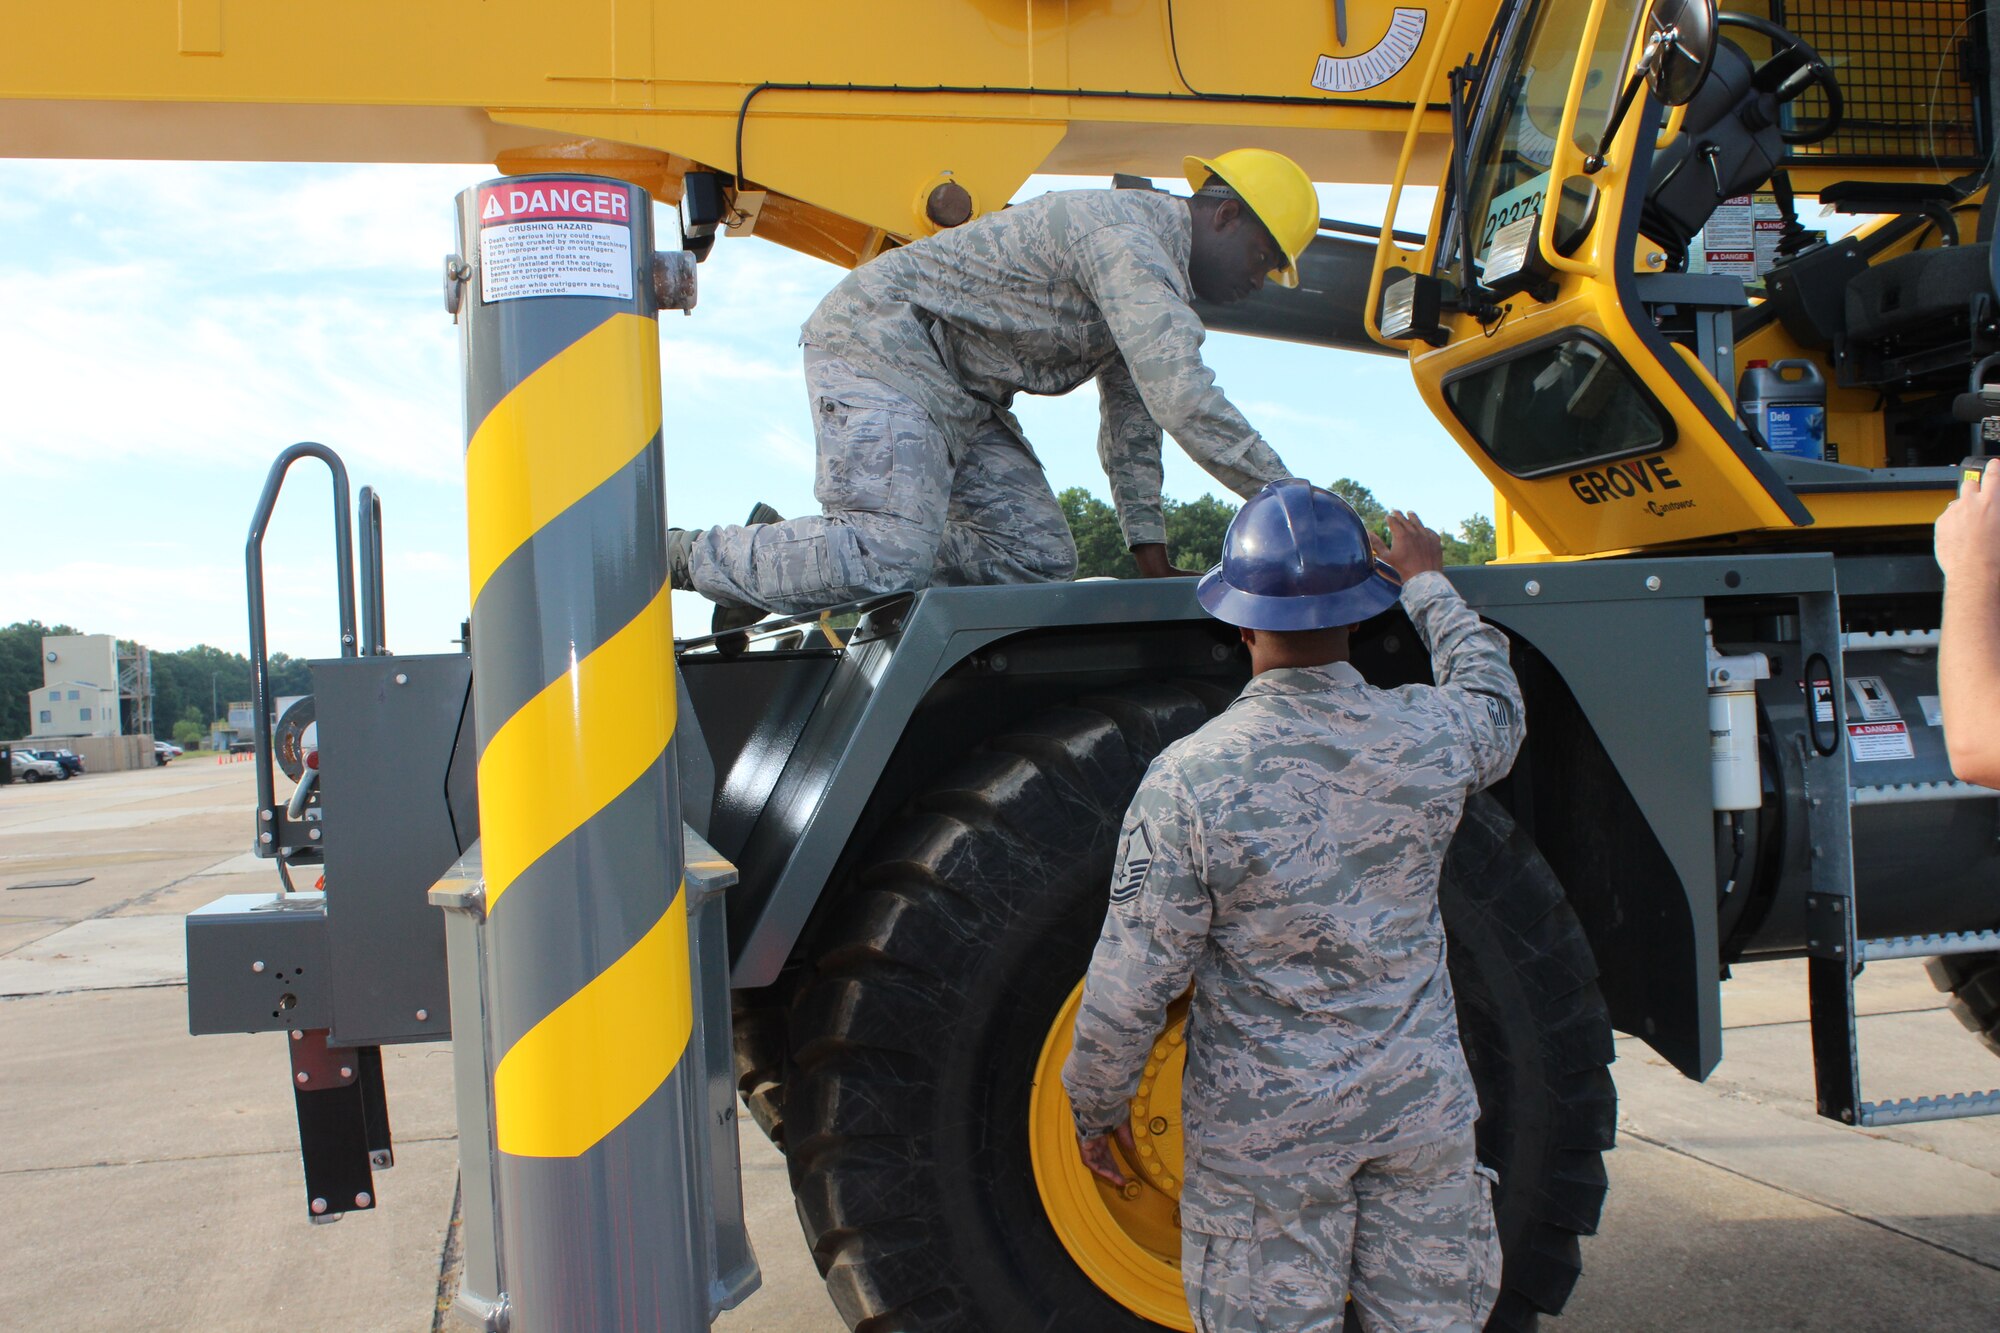 From left, Senior Airman Anthony Burgess, under the guidance of crane operator instructor Master Sgt. Alexes Abrams, works to make sure his crane is level before getting in the cab and beginning operations. Burgess was a student in the crane operator training program offered by the Expeditionary Combat Support-Training Certification Center at Dobbins Air Reserve Base, Ga. The course is taught, along with several other career field courses, on a “dead runway.” (U.S. Air Force Photo/Released)